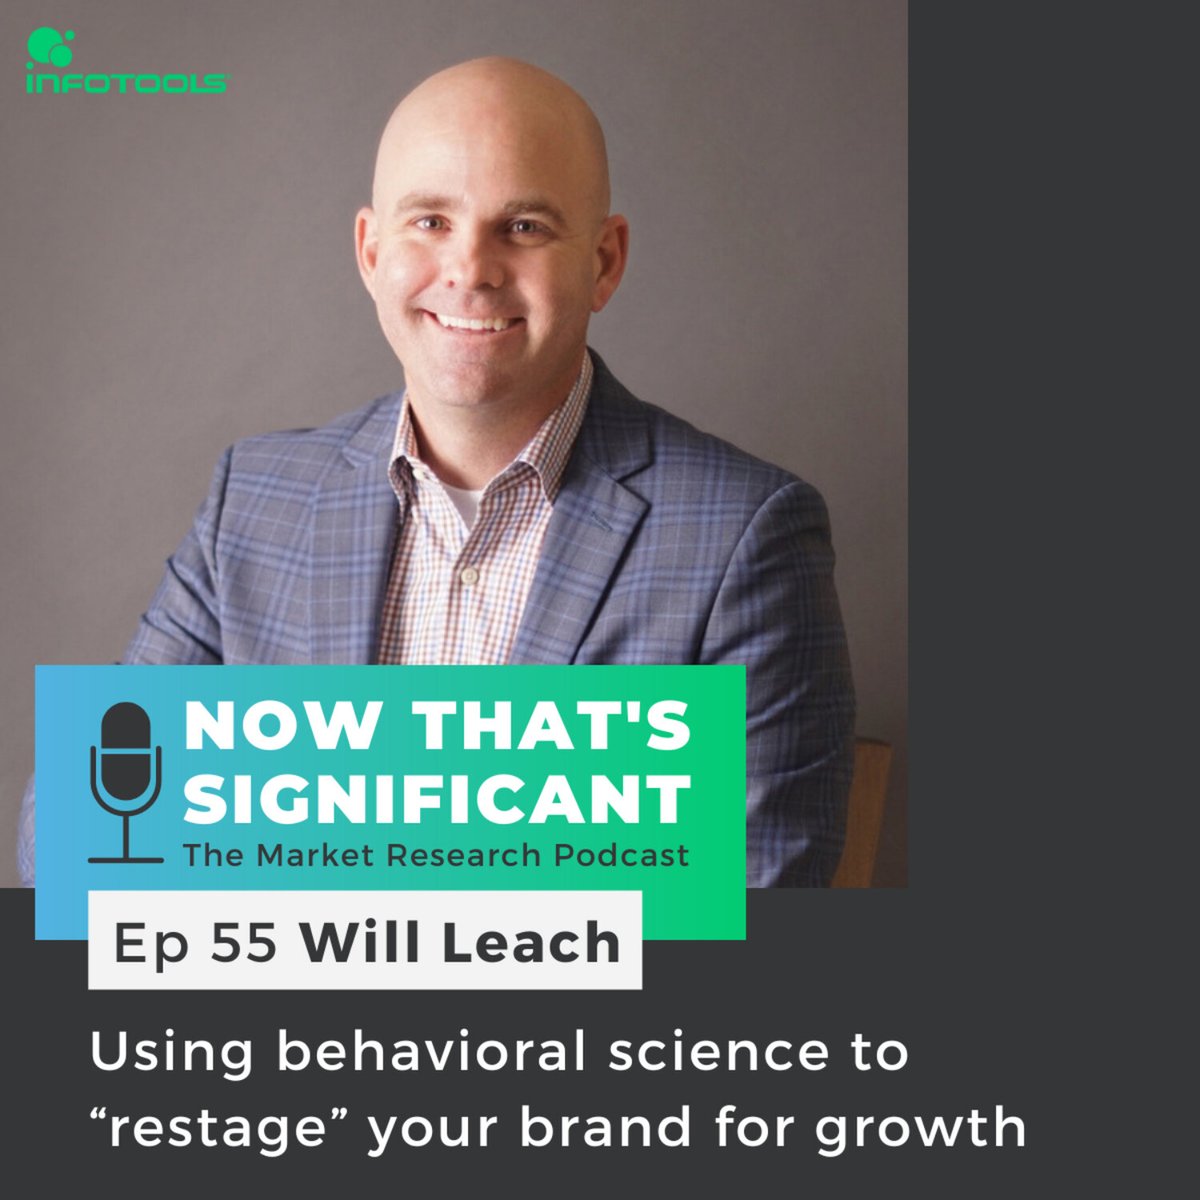 One year ago, William Leach of @mindstatemktg joined our #marketresearch #podcast to chat with us about using behavioral science to psychologically restage brains. He says this can set us up for exponential growth. Listen here: hubs.li/Q02pQksK0 #insights #mrx